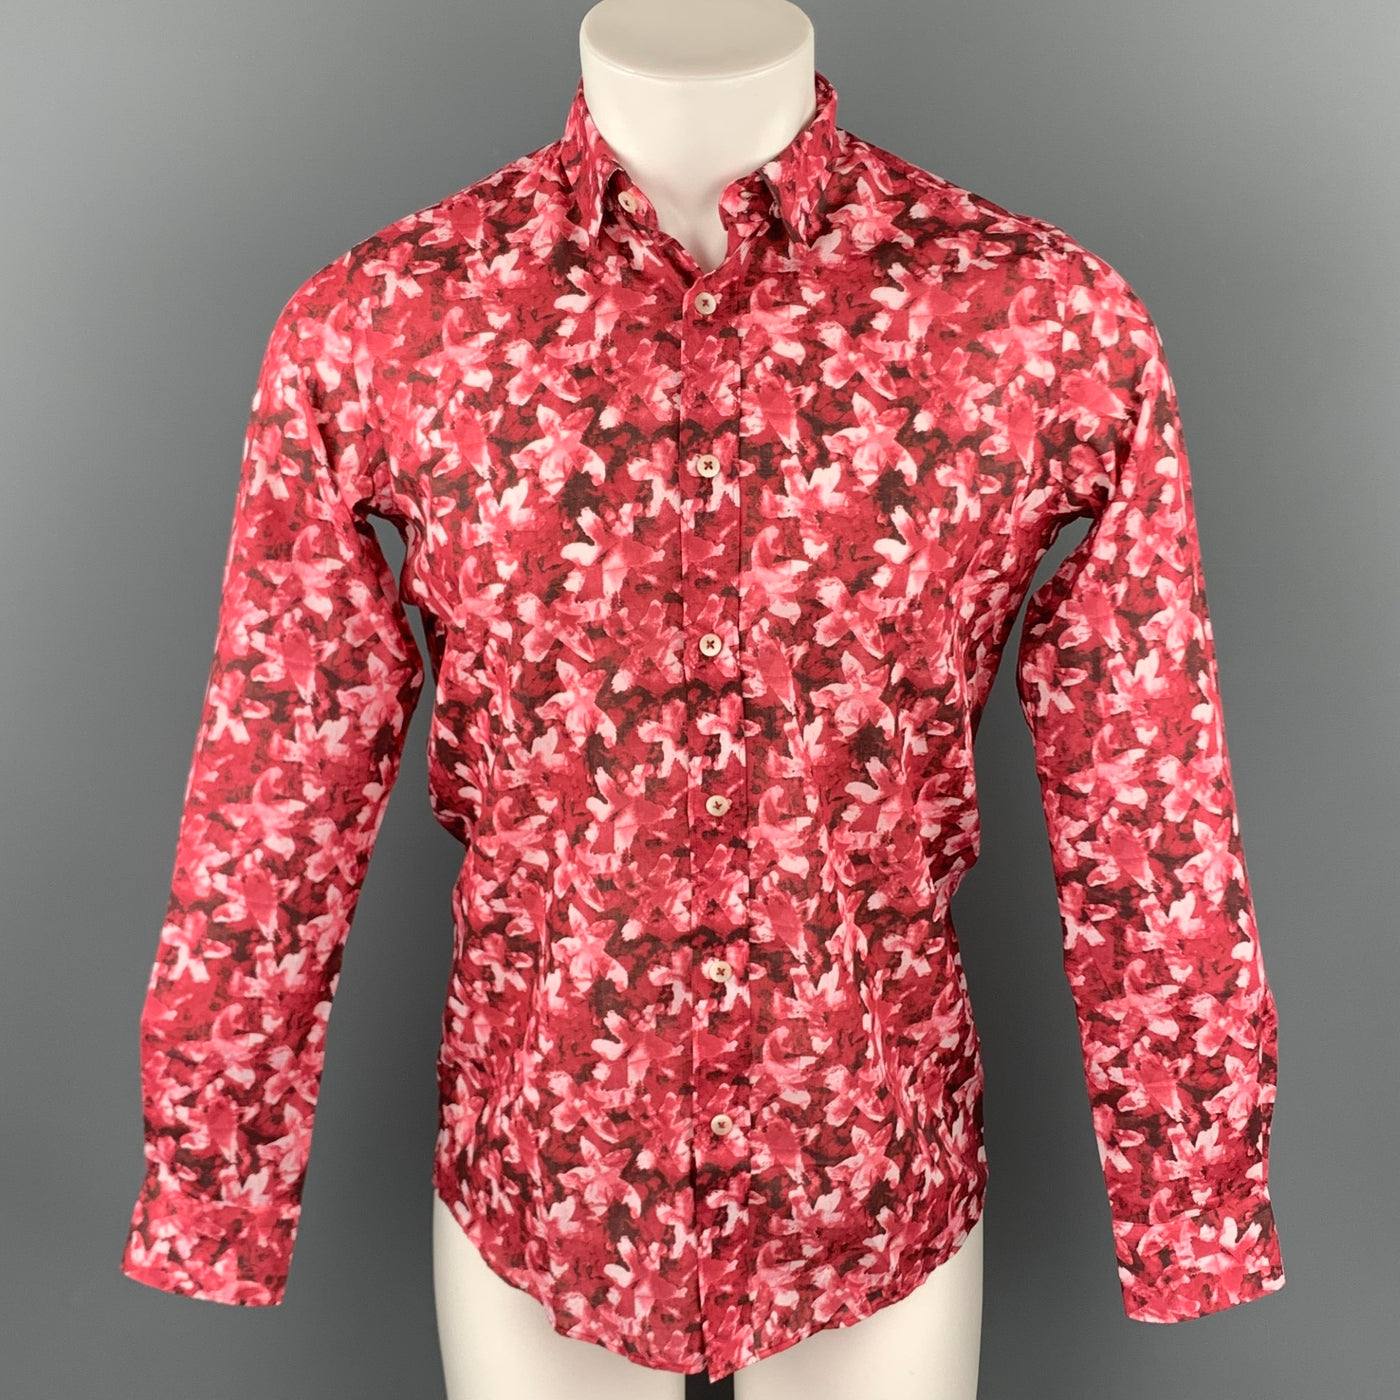 TWEEN Smart Chic Size XS Red & White Floral Cotton Slim Fit Long Sleeve Shirt